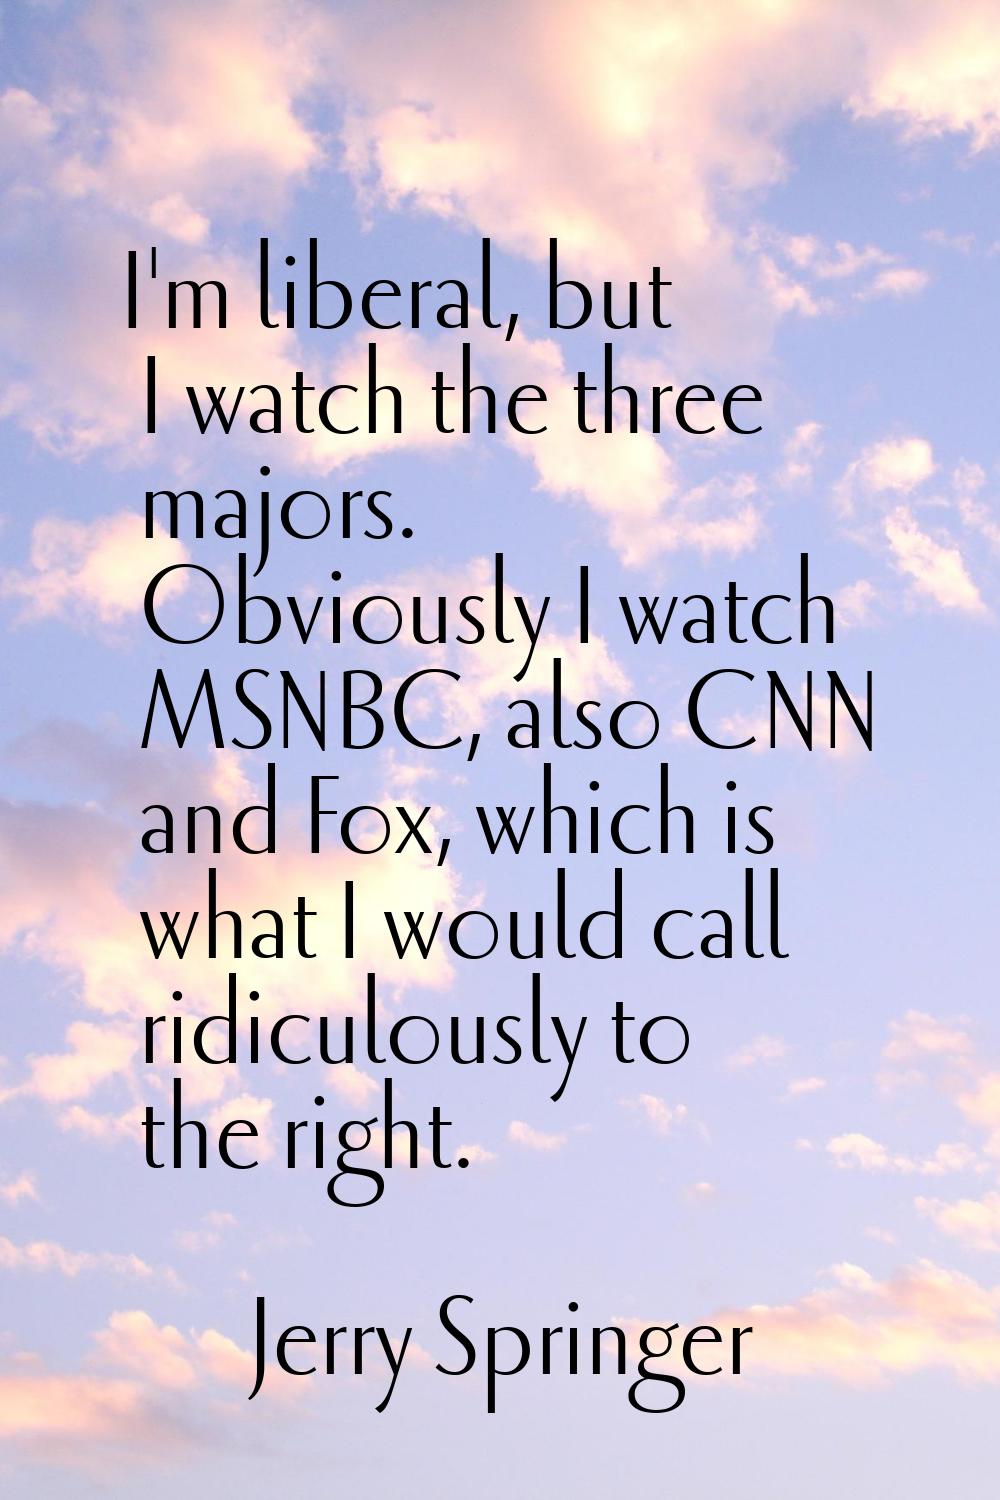 I'm liberal, but I watch the three majors. Obviously I watch MSNBC, also CNN and Fox, which is what